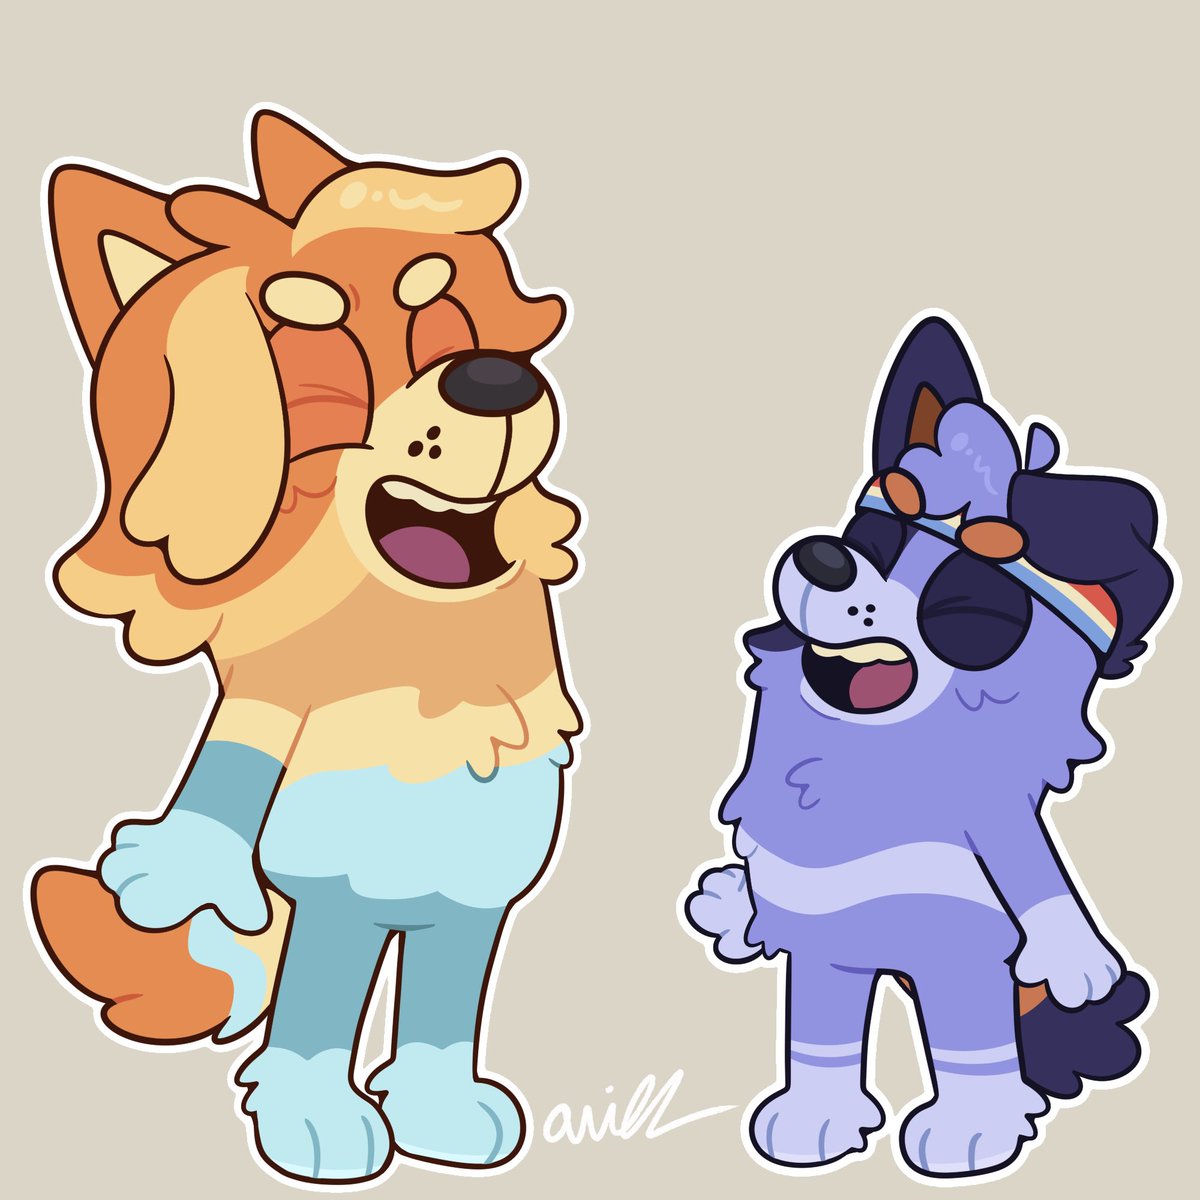 let’s see who can scream louder! 🐾

#bluey #blueyart